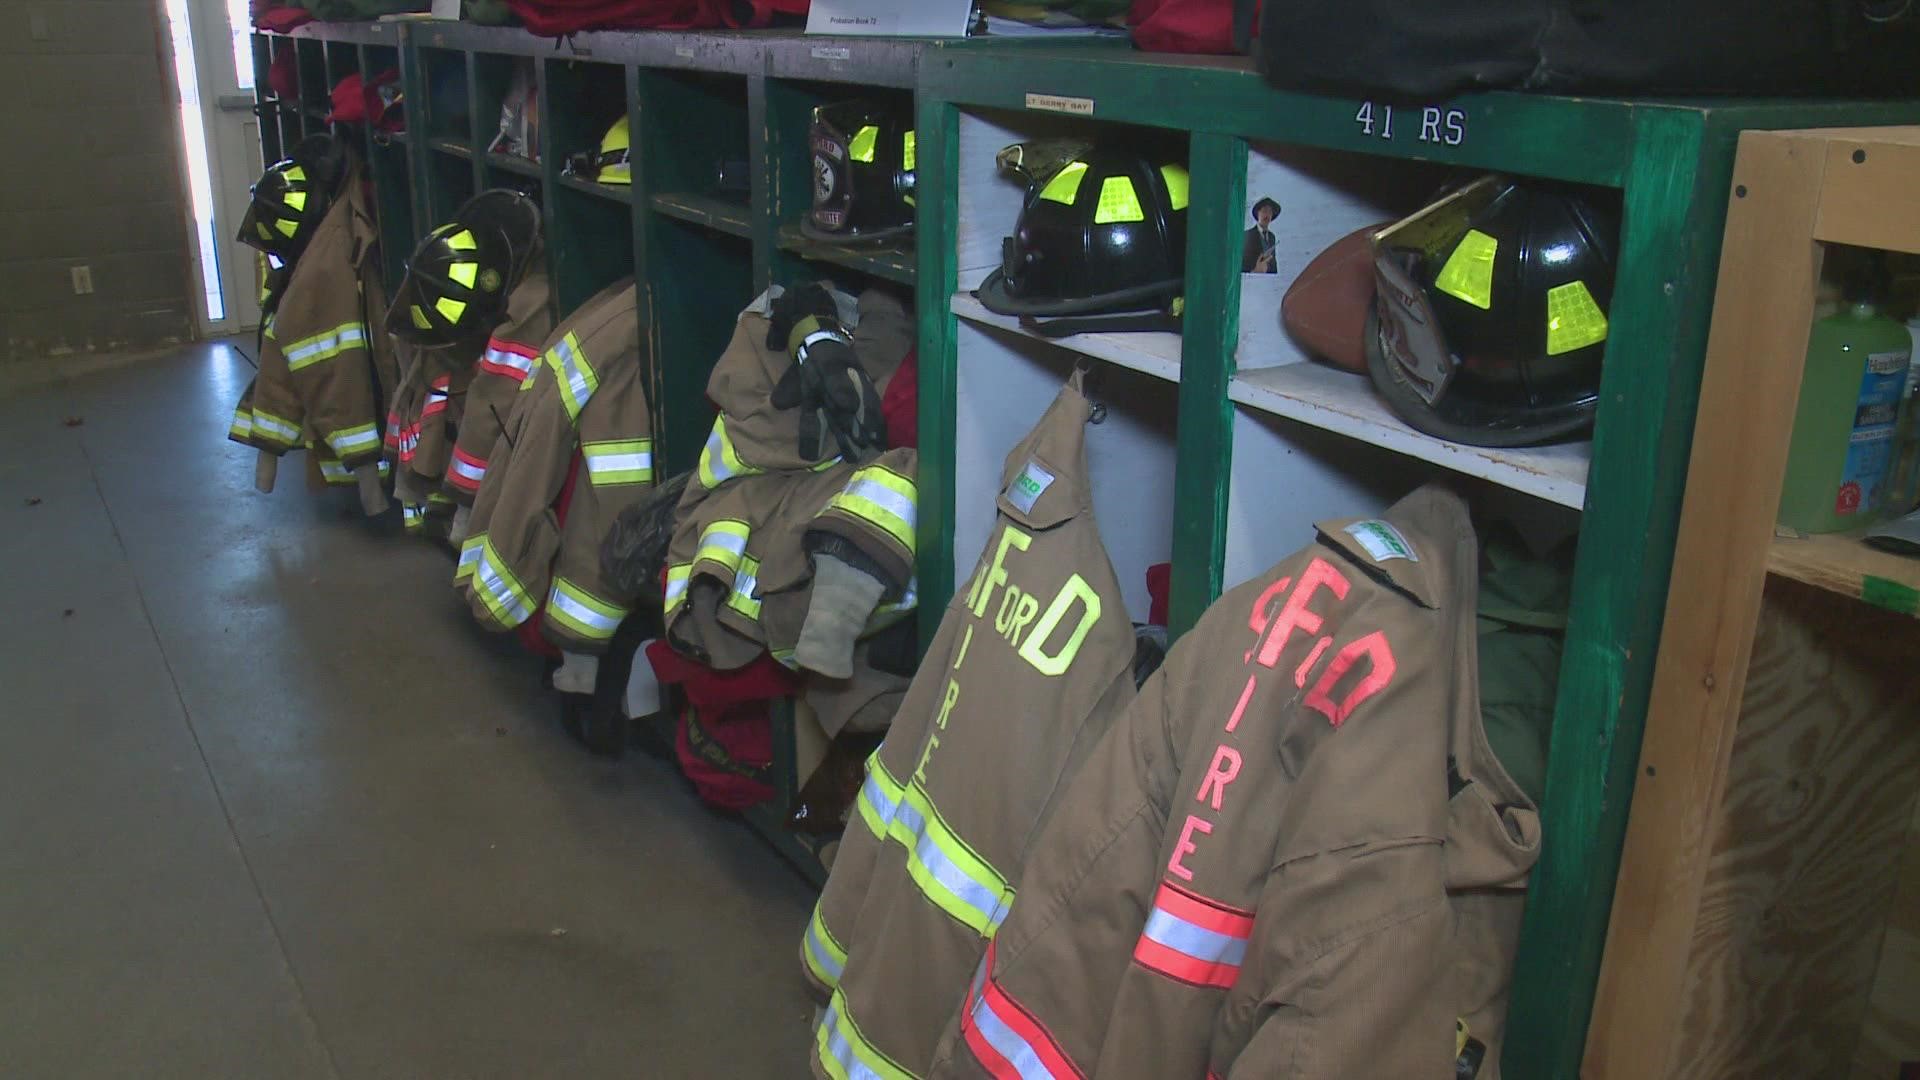 The decline of firefighters nationwide is continuing, but the Sanford Fire Department has hired 13 firefighters in two years with the help of the tech school